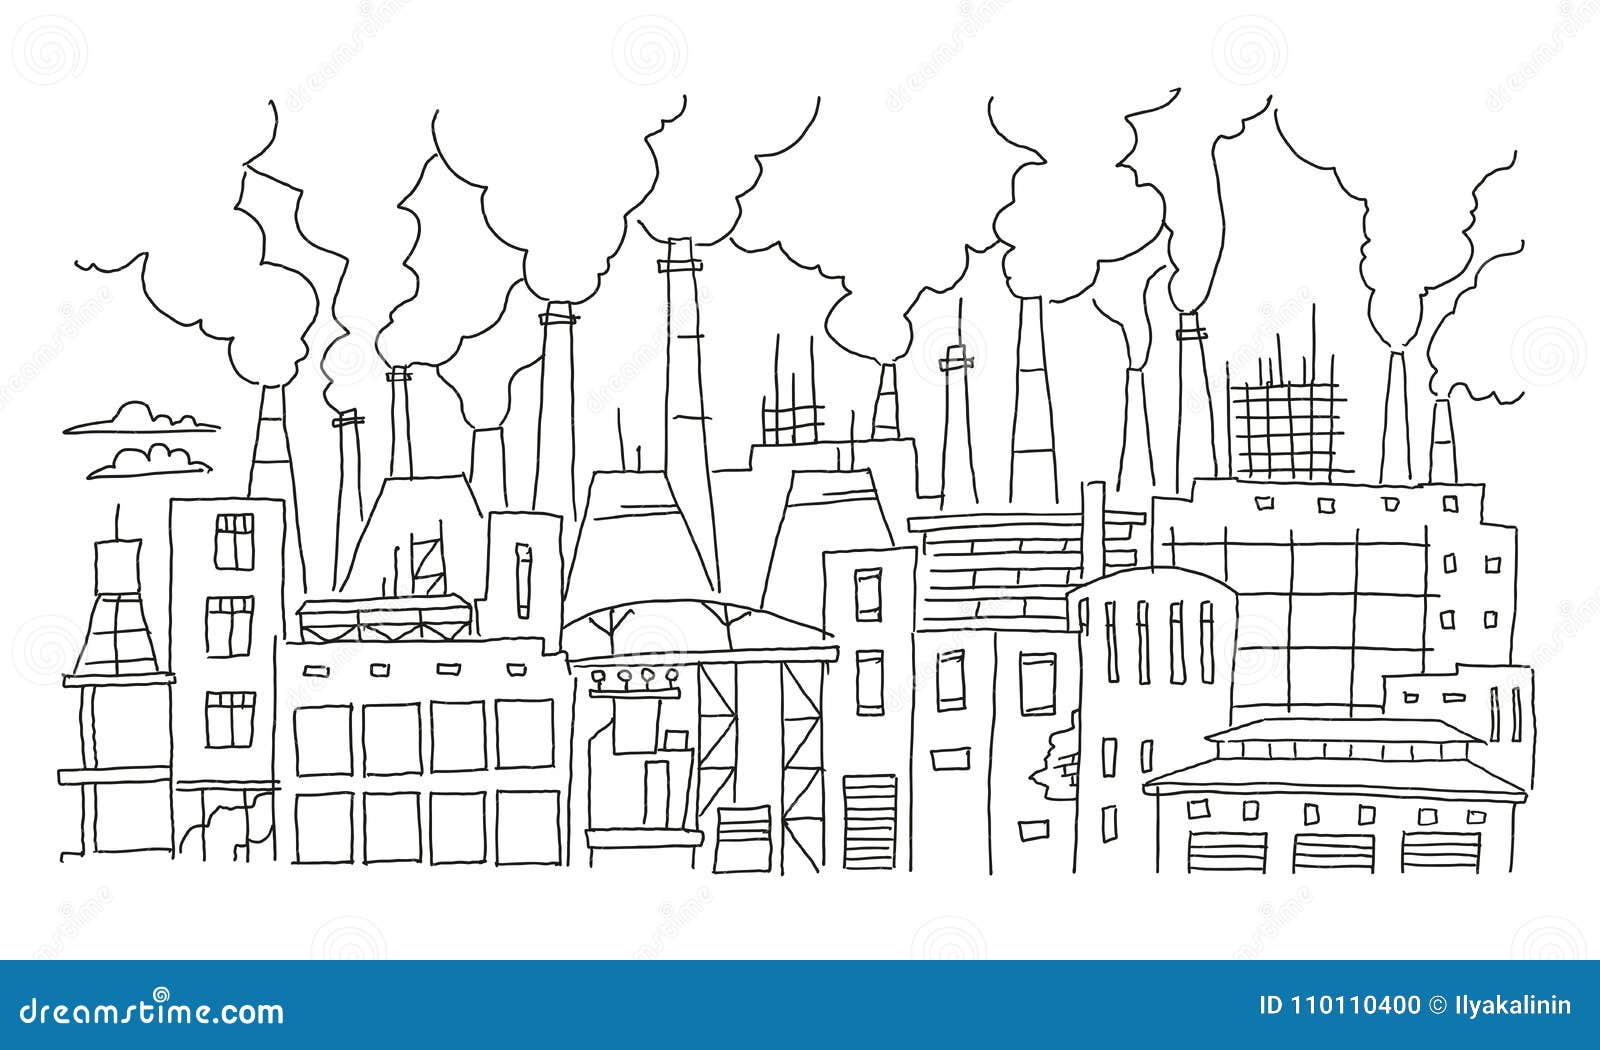 1838 Air Pollution Sketch Images Stock Photos  Vectors  Shutterstock